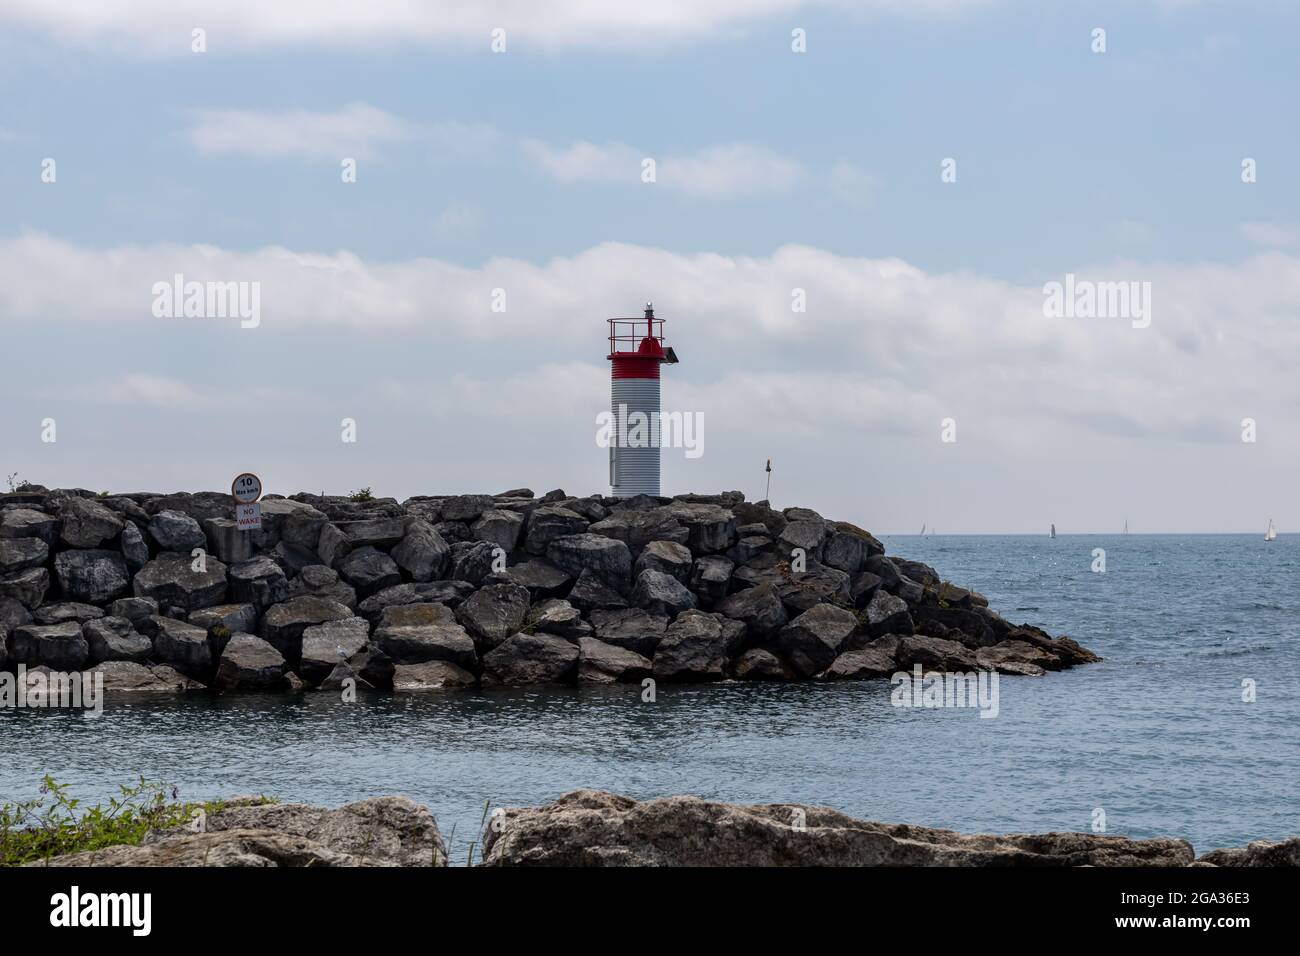 A small red and white lighthouse on a rocky pier at Lakefront Promenade Park, Mississauga, Lake Ontario. Sailboats in background. Stock Photo